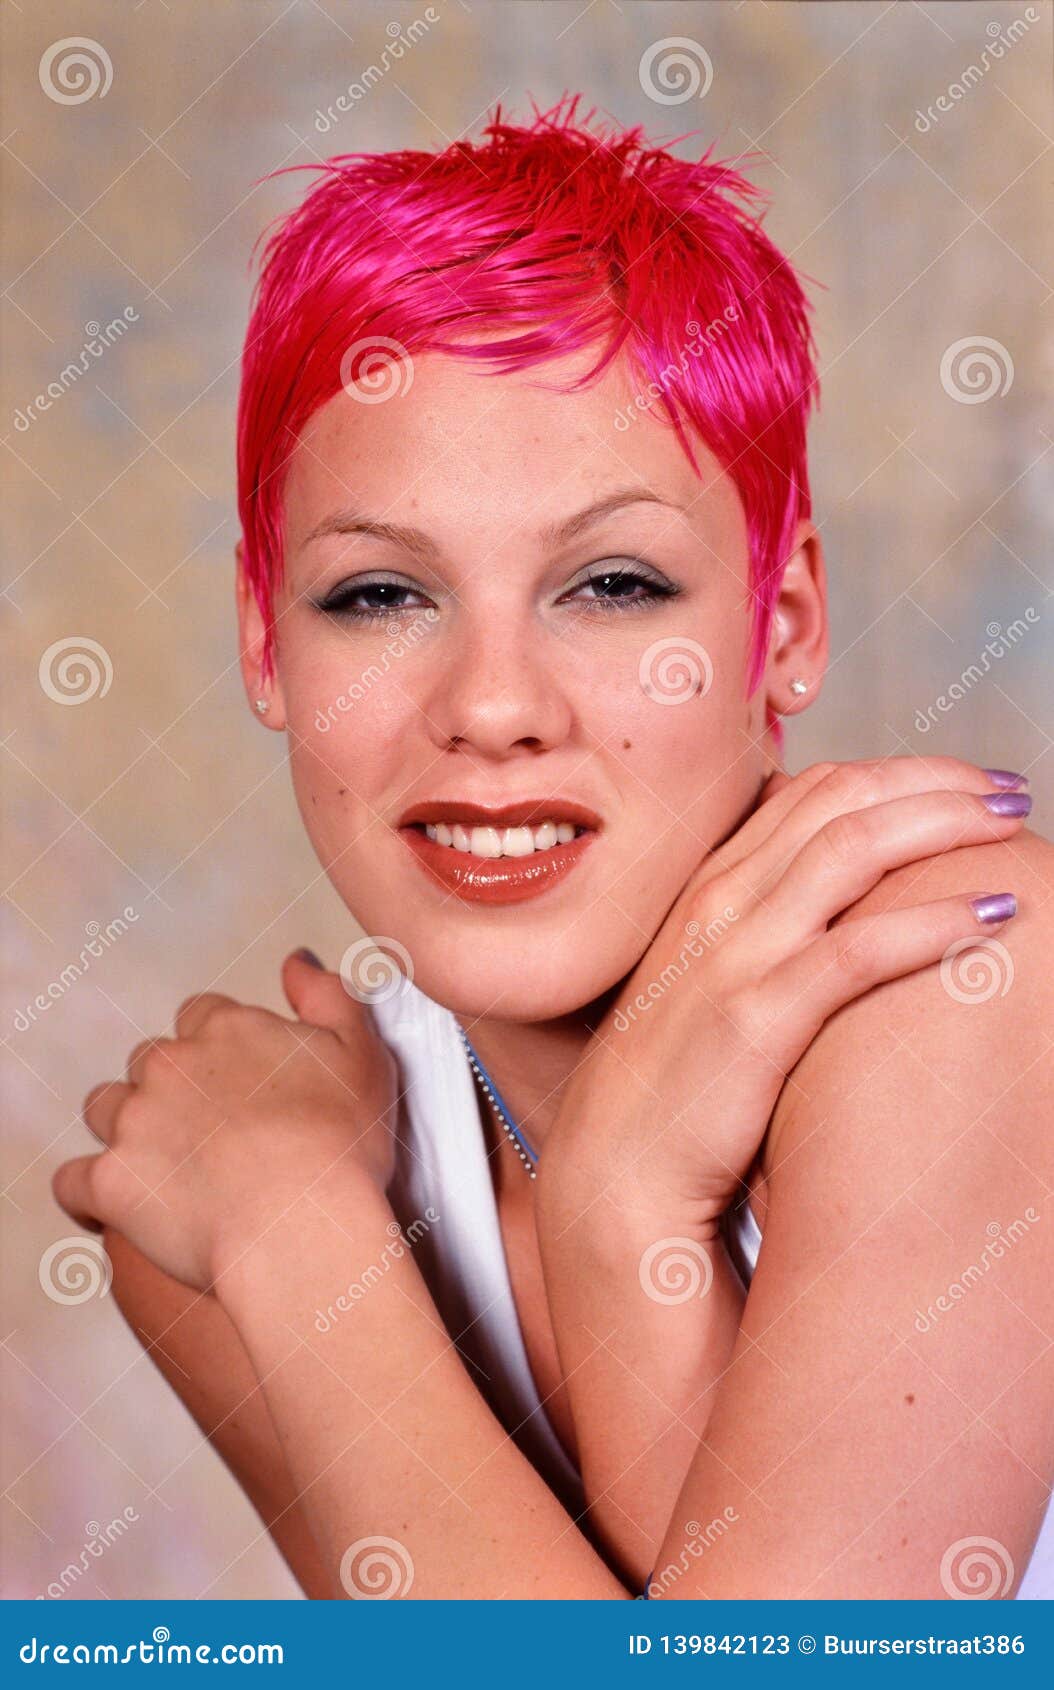 Singer Pink Editorial Stock Photo. Image Of Grammy, Alecia - 139842123